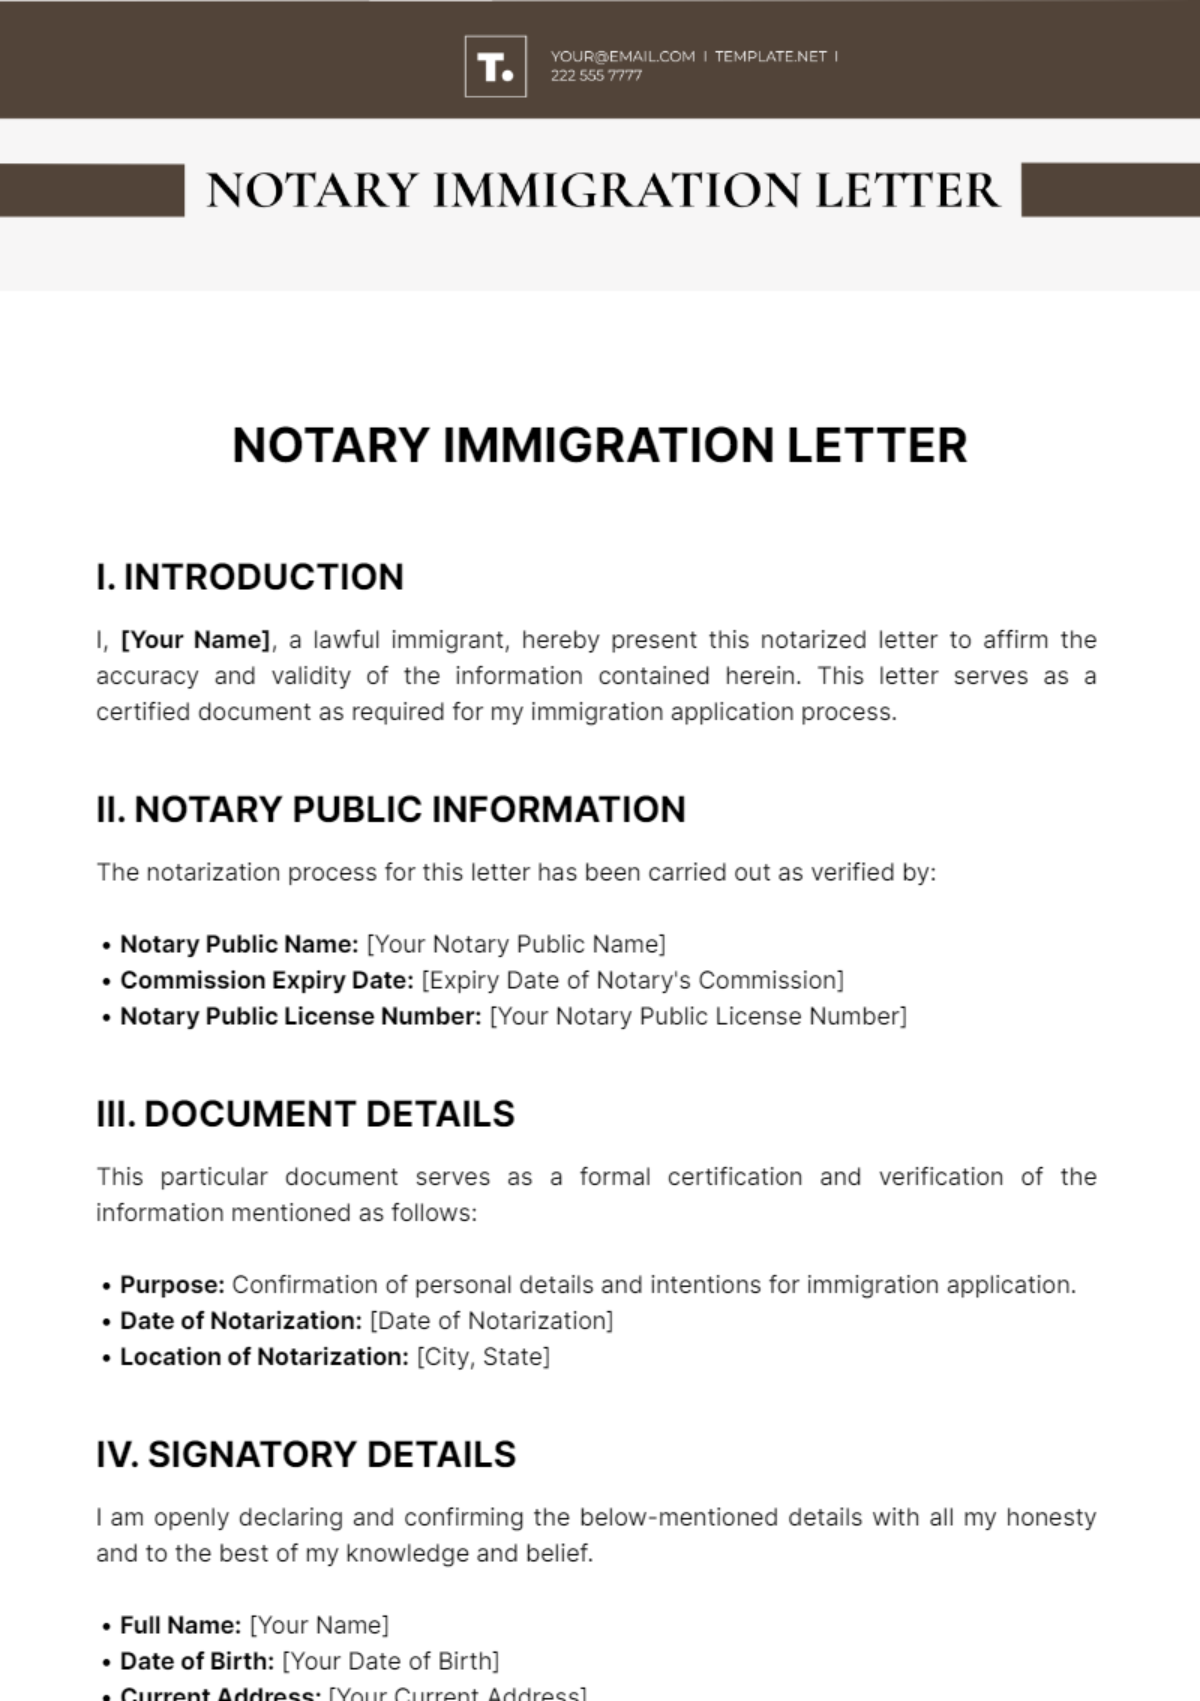 Notary Immigration Letter Template